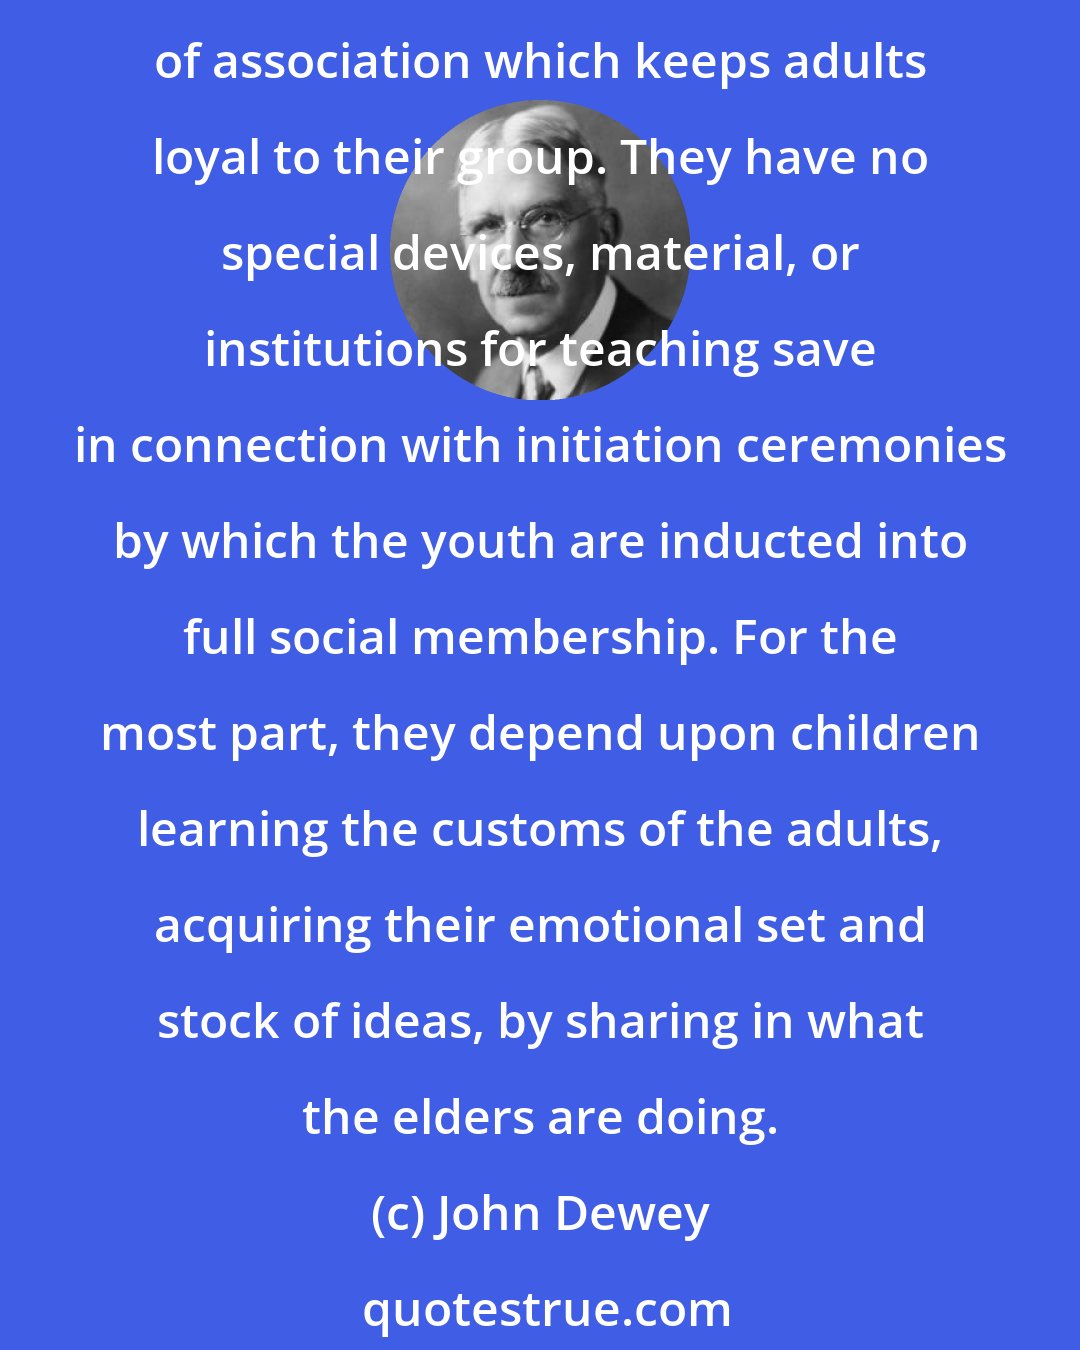 John Dewey: In undeveloped social groups, we find very little formal teaching and training. Savage groups mainly rely for instilling needed dispositions into the young upon the same sort of association which keeps adults loyal to their group. They have no special devices, material, or institutions for teaching save in connection with initiation ceremonies by which the youth are inducted into full social membership. For the most part, they depend upon children learning the customs of the adults, acquiring their emotional set and stock of ideas, by sharing in what the elders are doing.